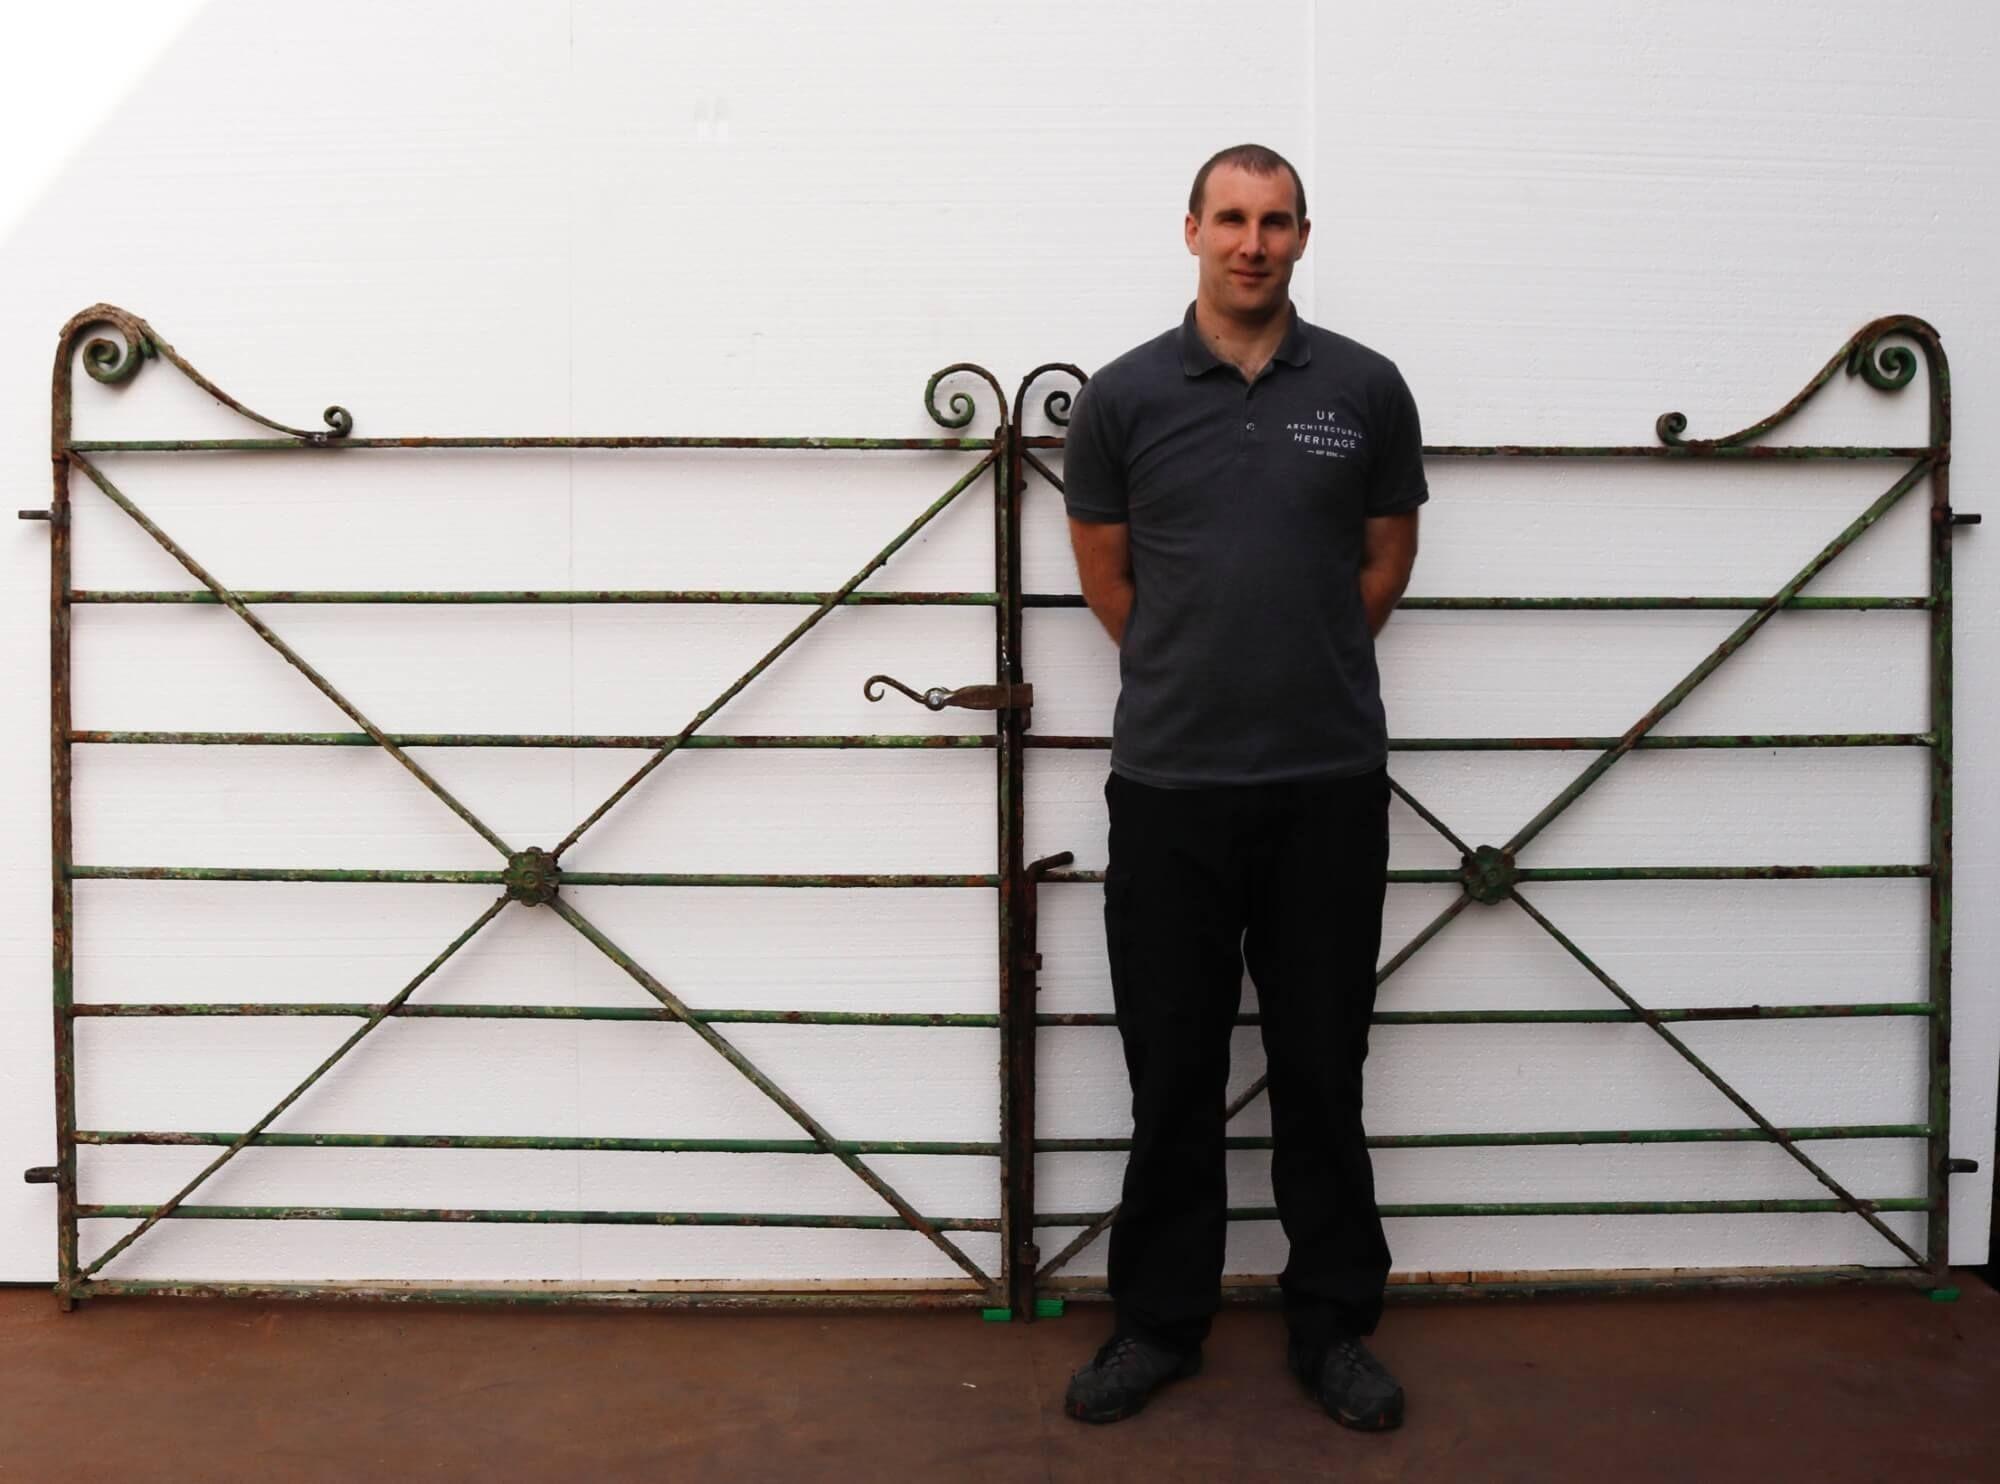 A pair of Georgian wrought iron estate gates with an original latch. This pair of impressive gates would stand out at a countryside home. With a flower in the centre and green finish match perfectly with its scrolling ends. This gate certainly